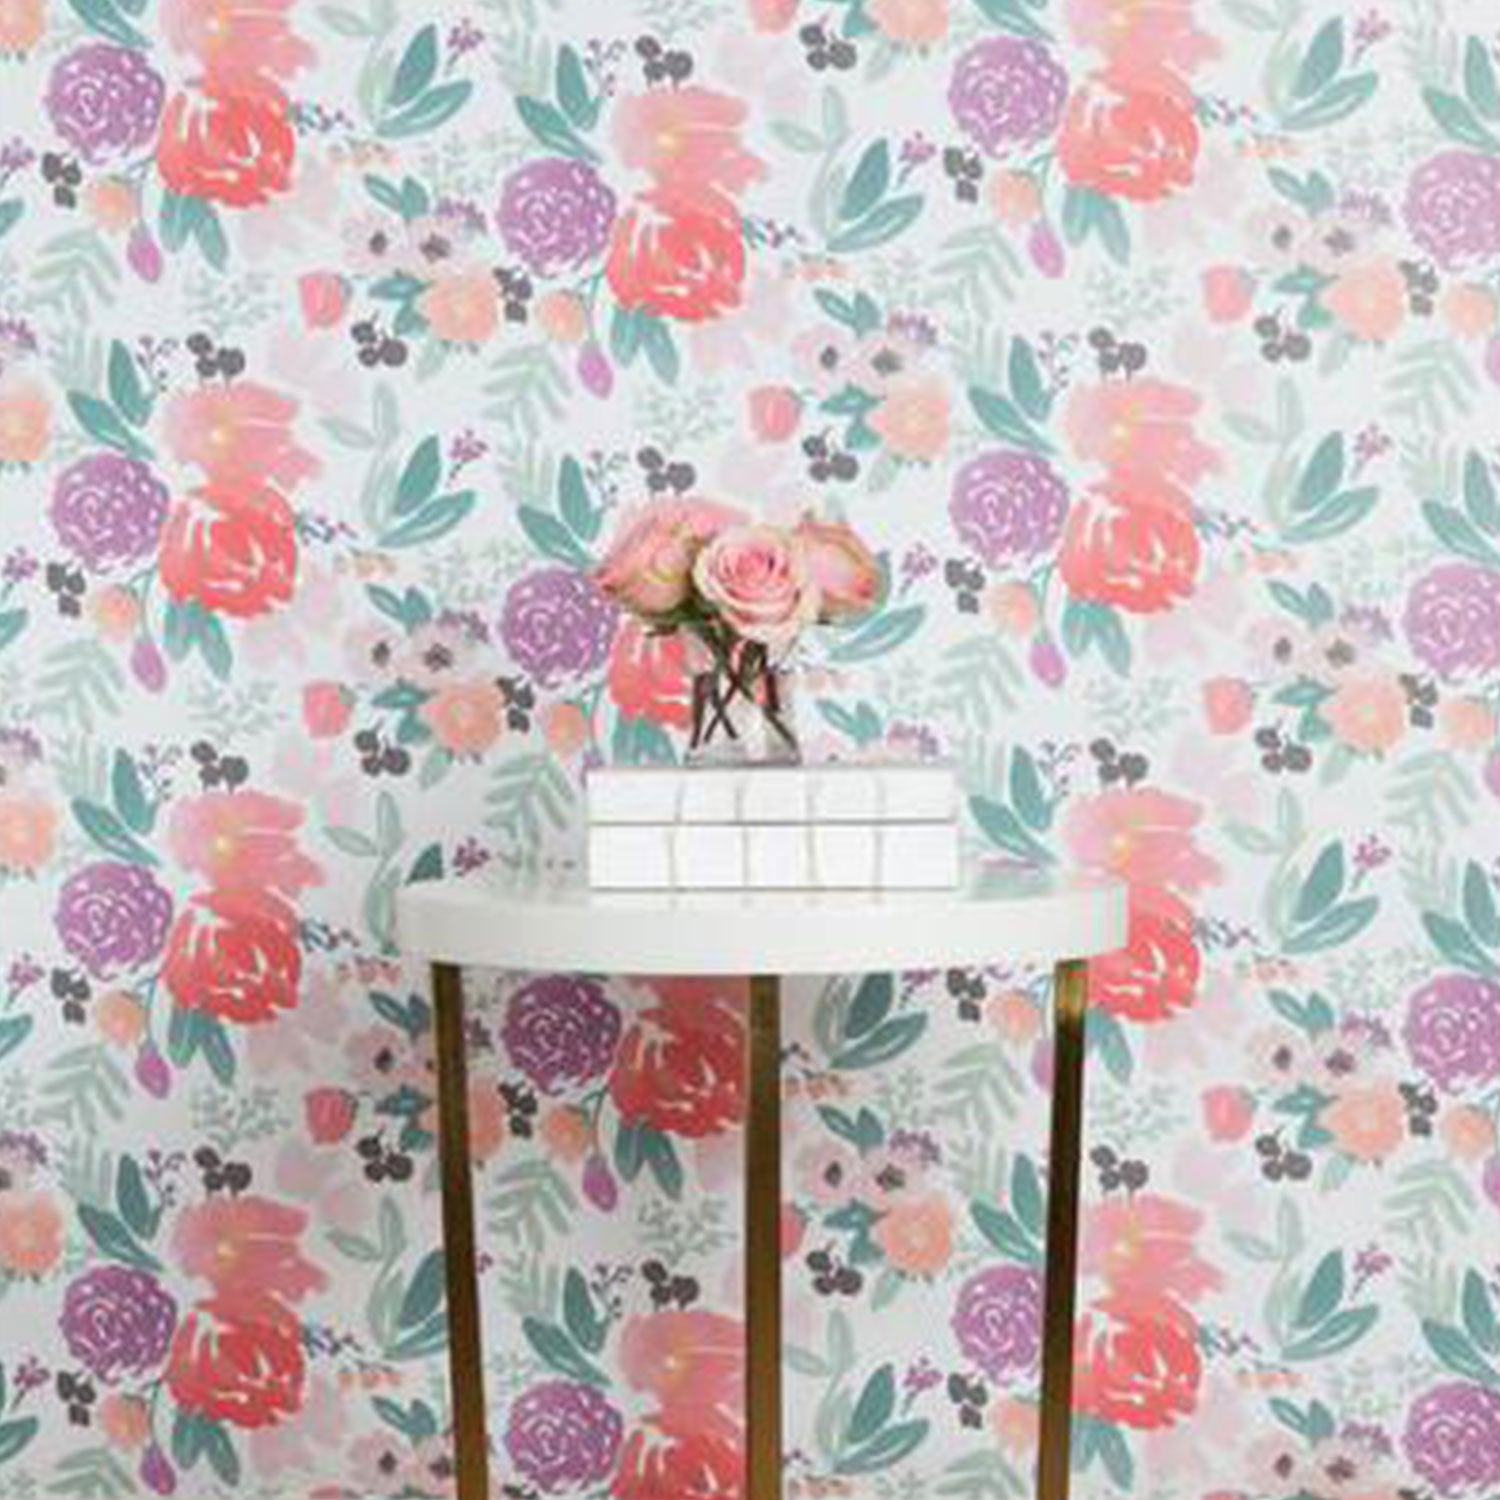 Blooms Petite in White Watercolor Floral Wallpaper on Wall